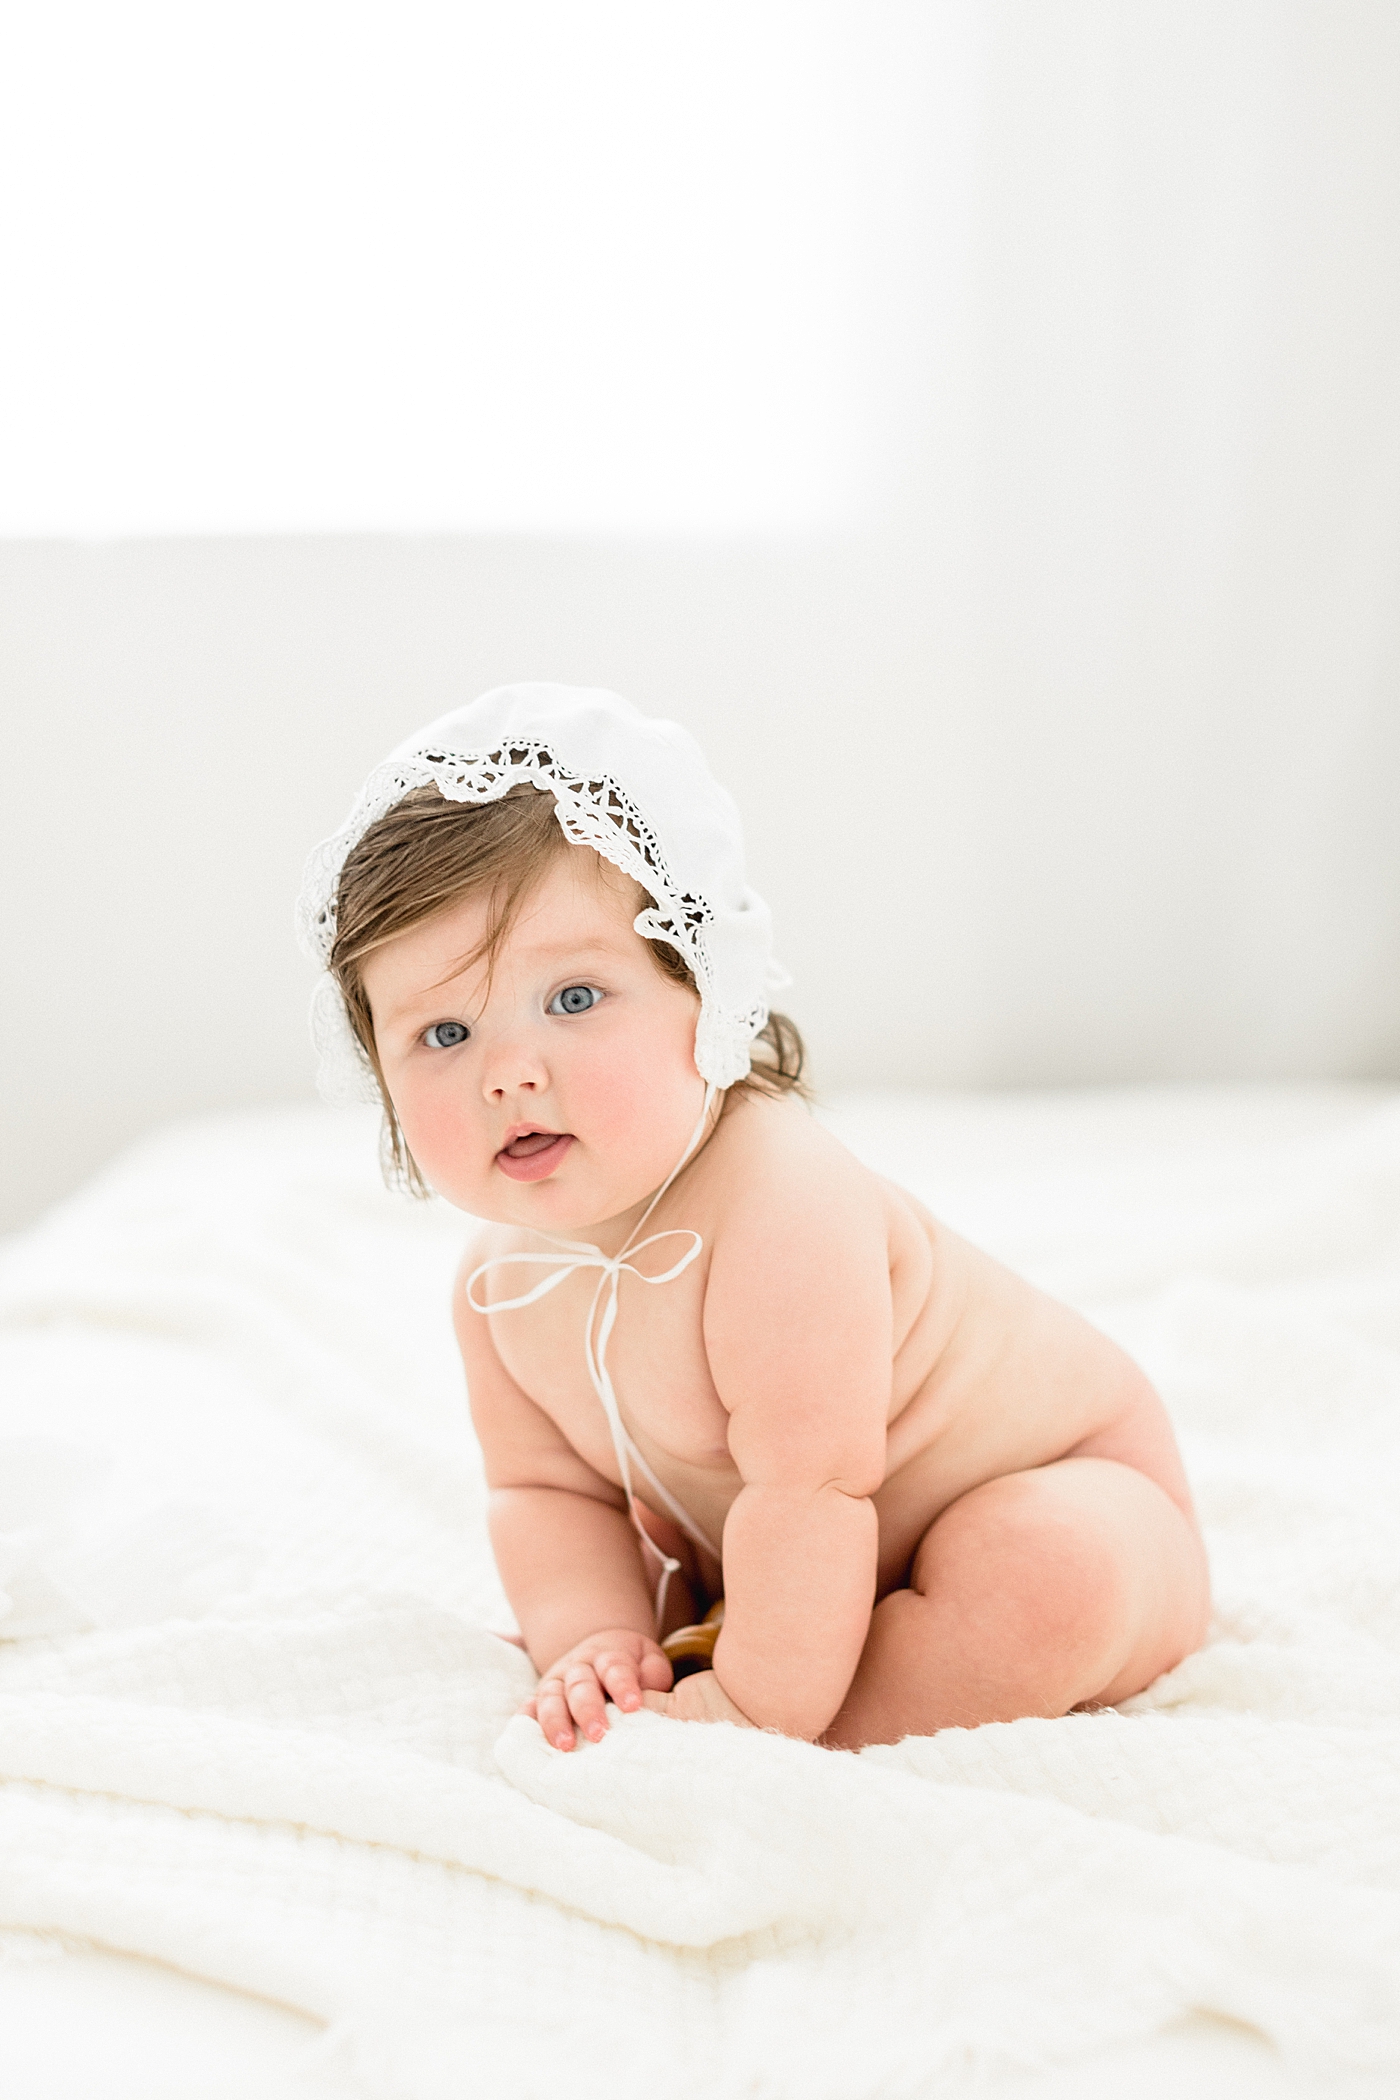 Six month old baby girl wearing a bonnet for milestone session. Photo by Brittany Elise Photography.